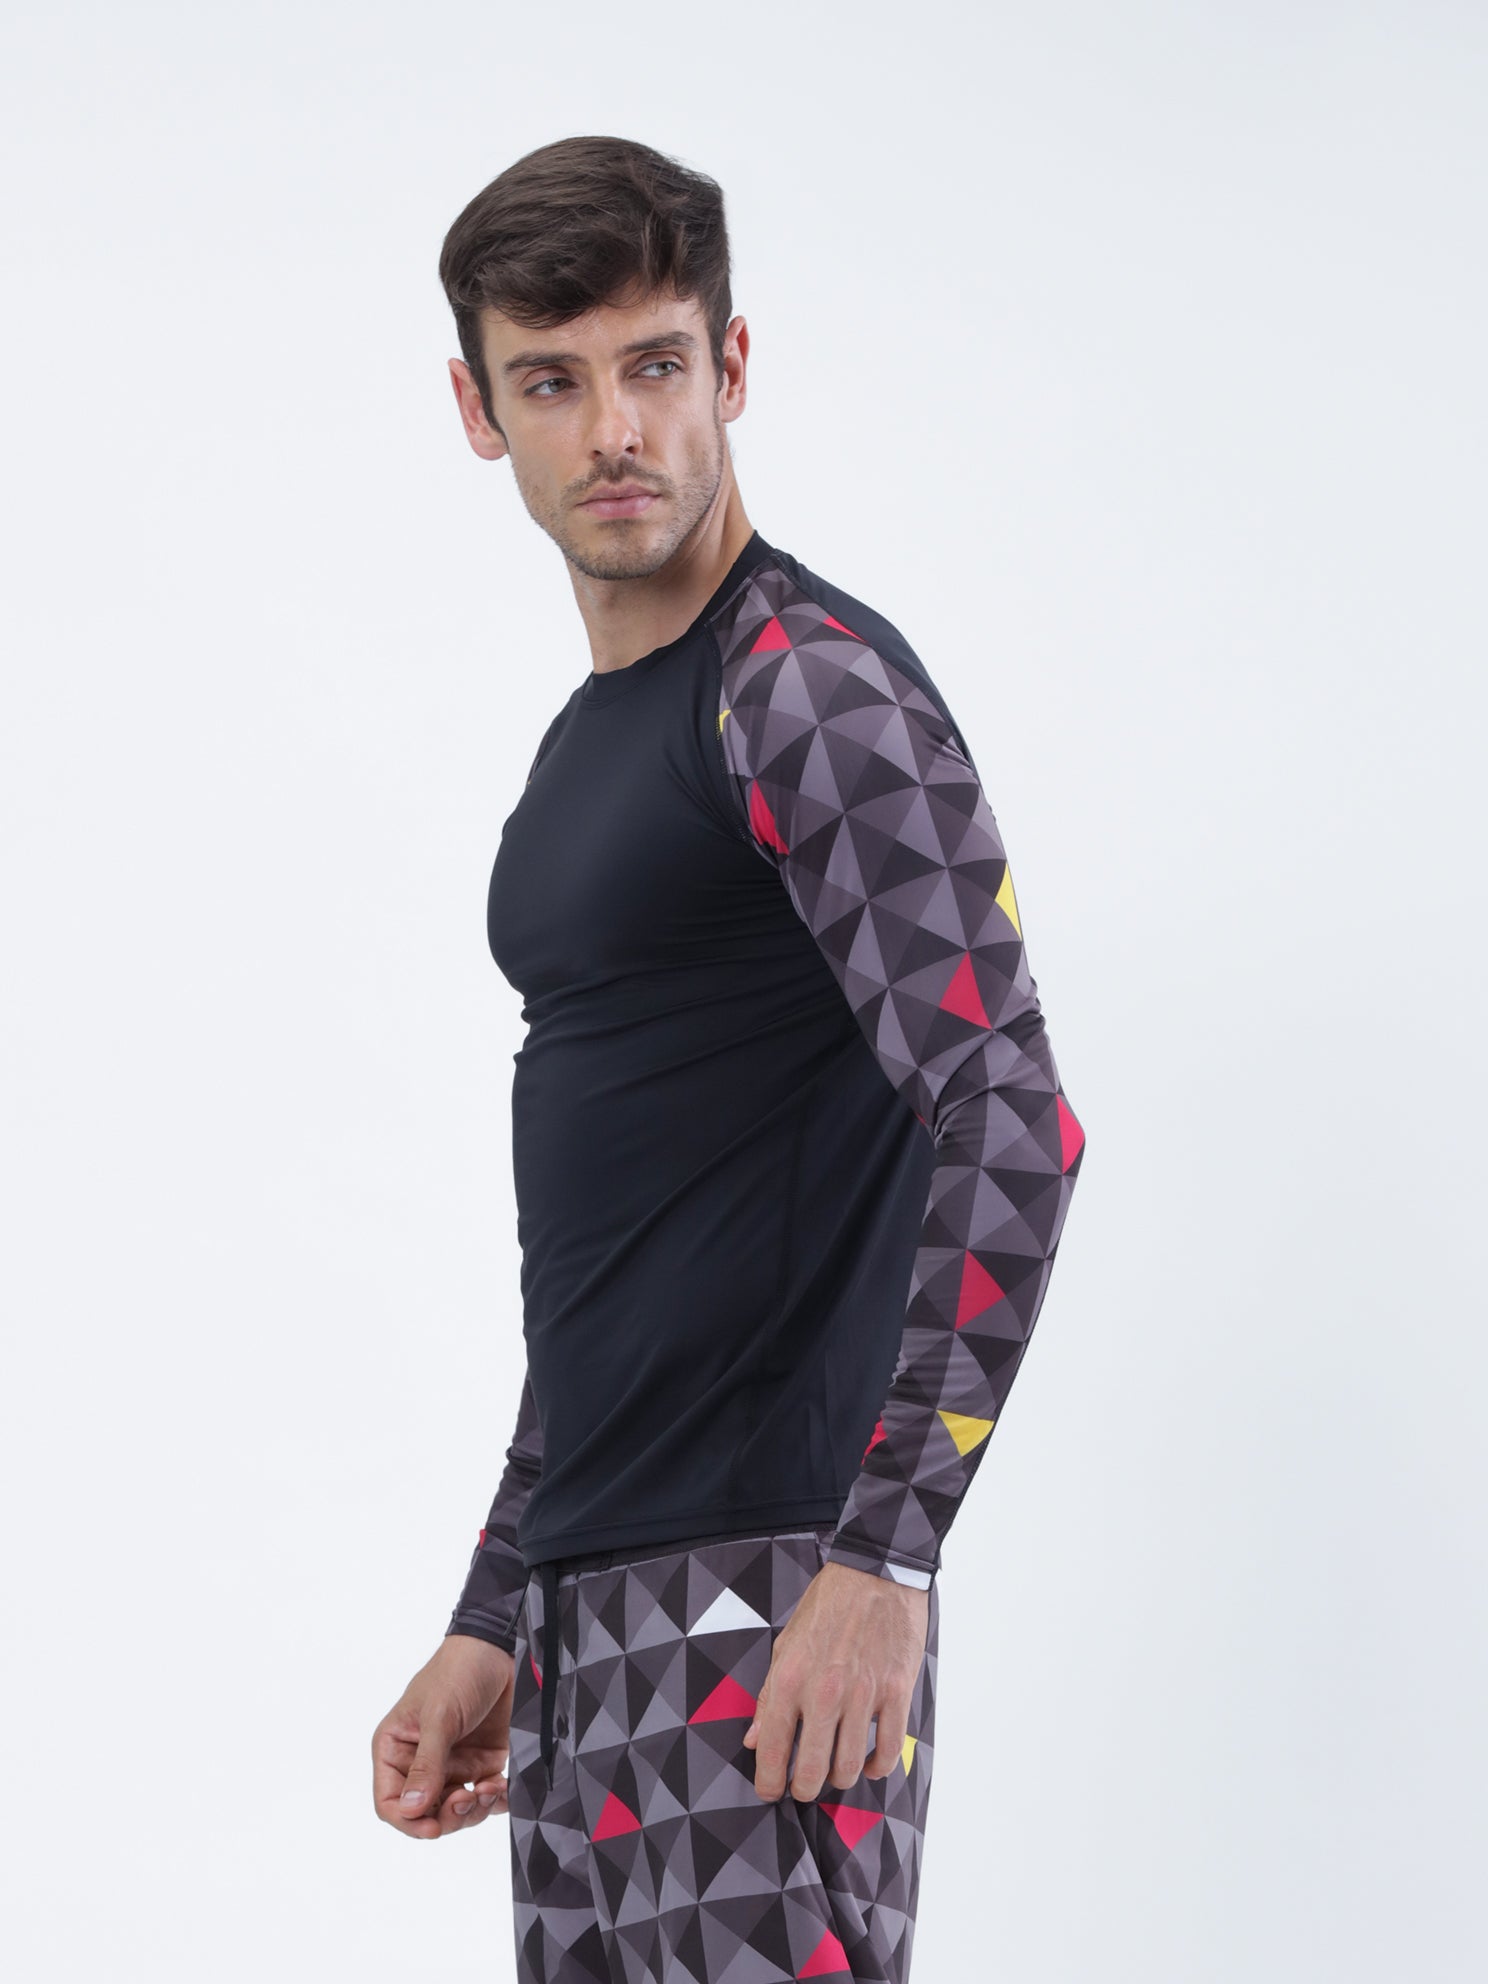 AbsArt full sleeve compression top - Zebo Active Wear